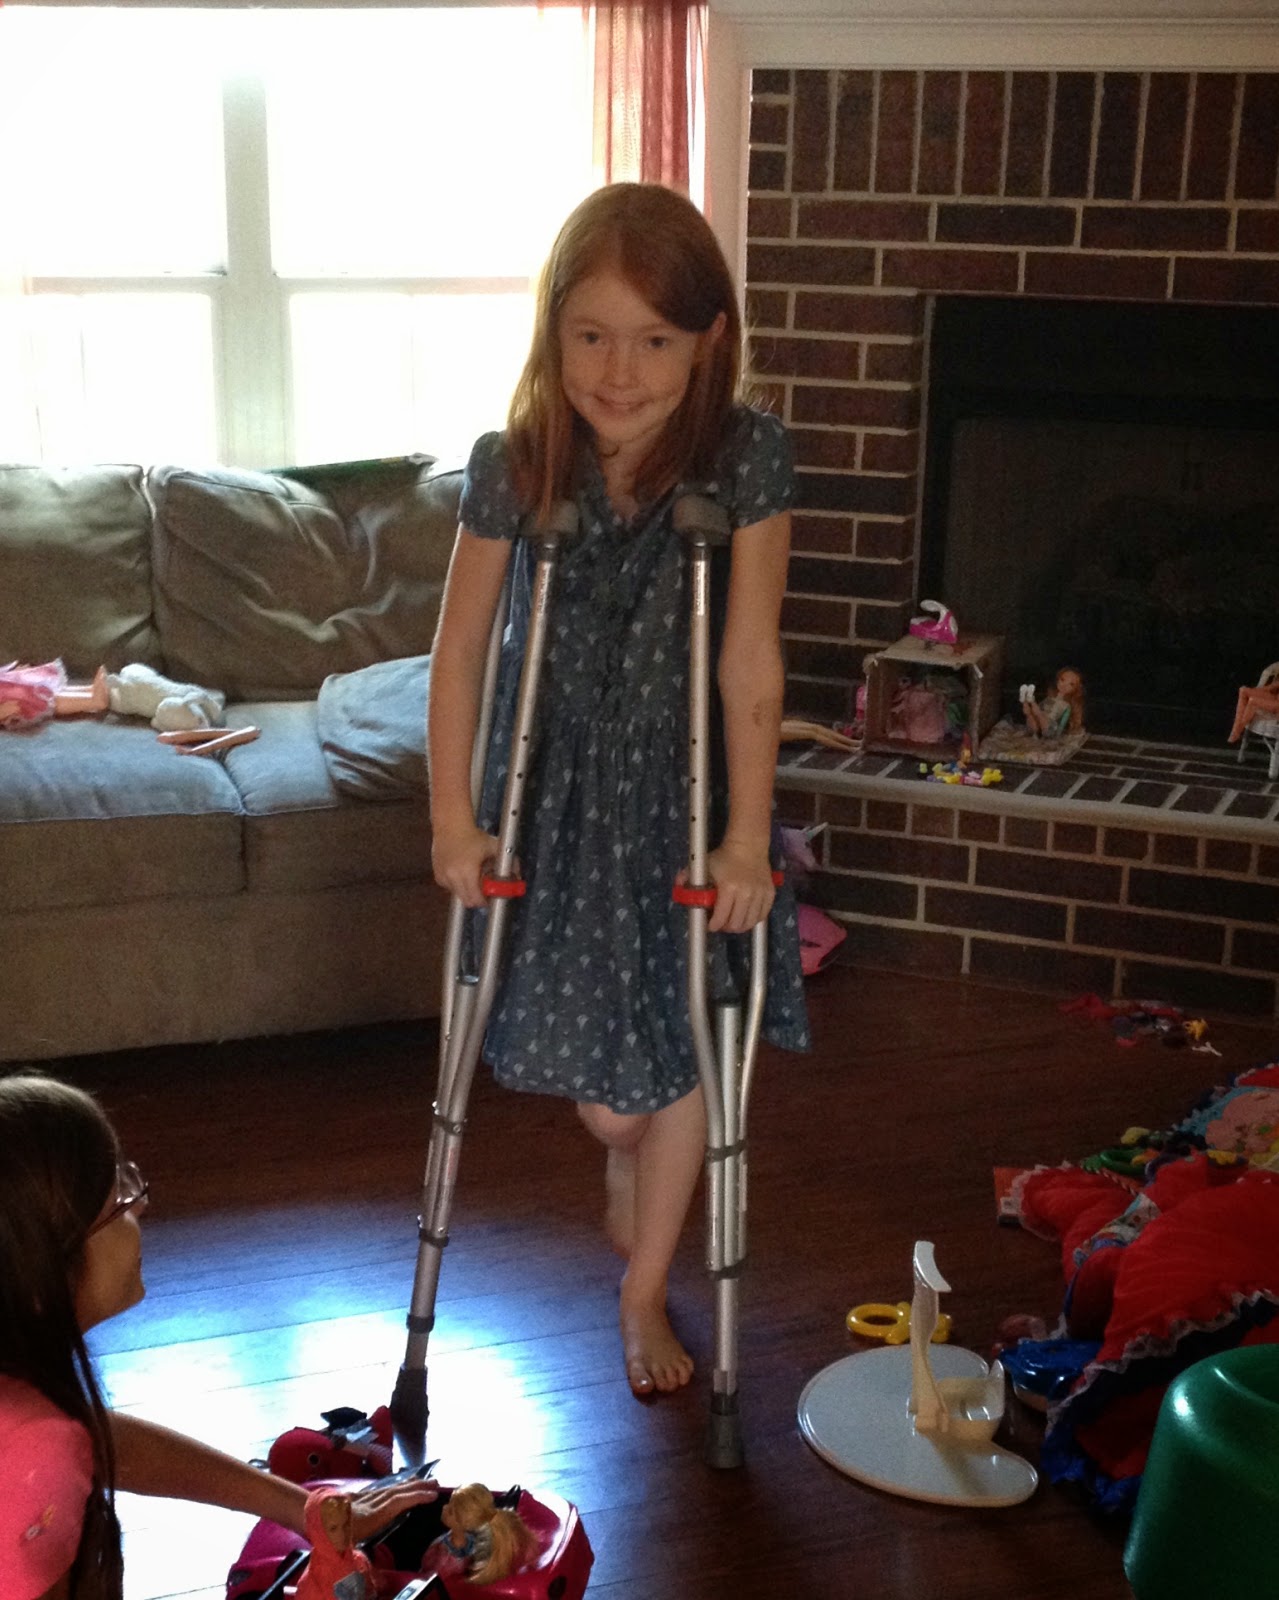 Our Family: Crutches!